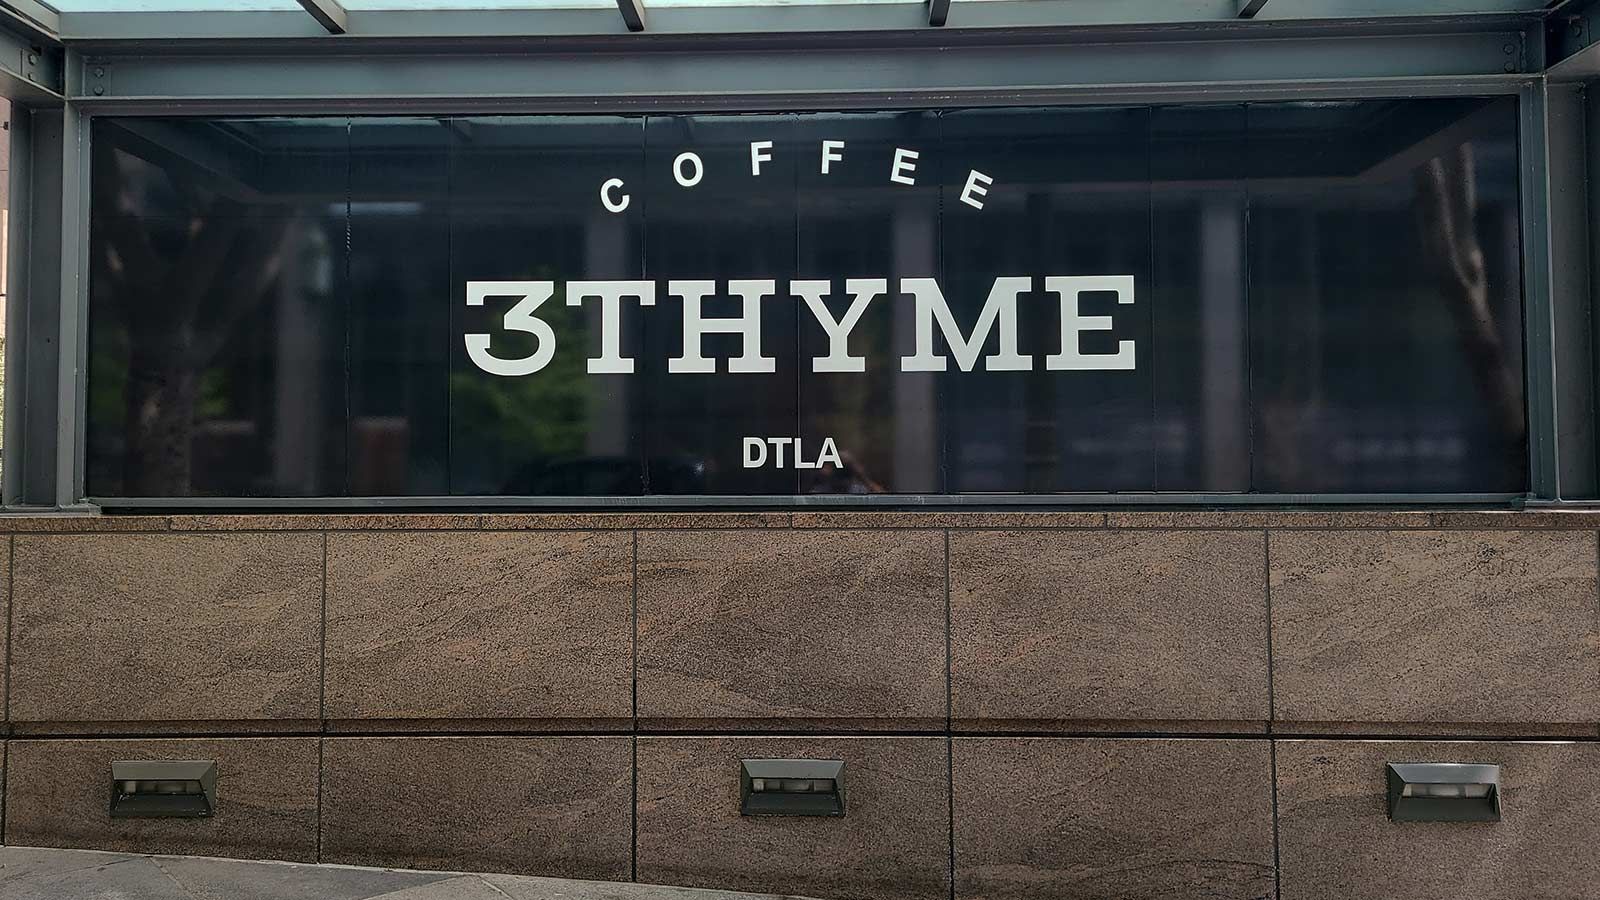 3Thyme Coffee window decal attached to the window